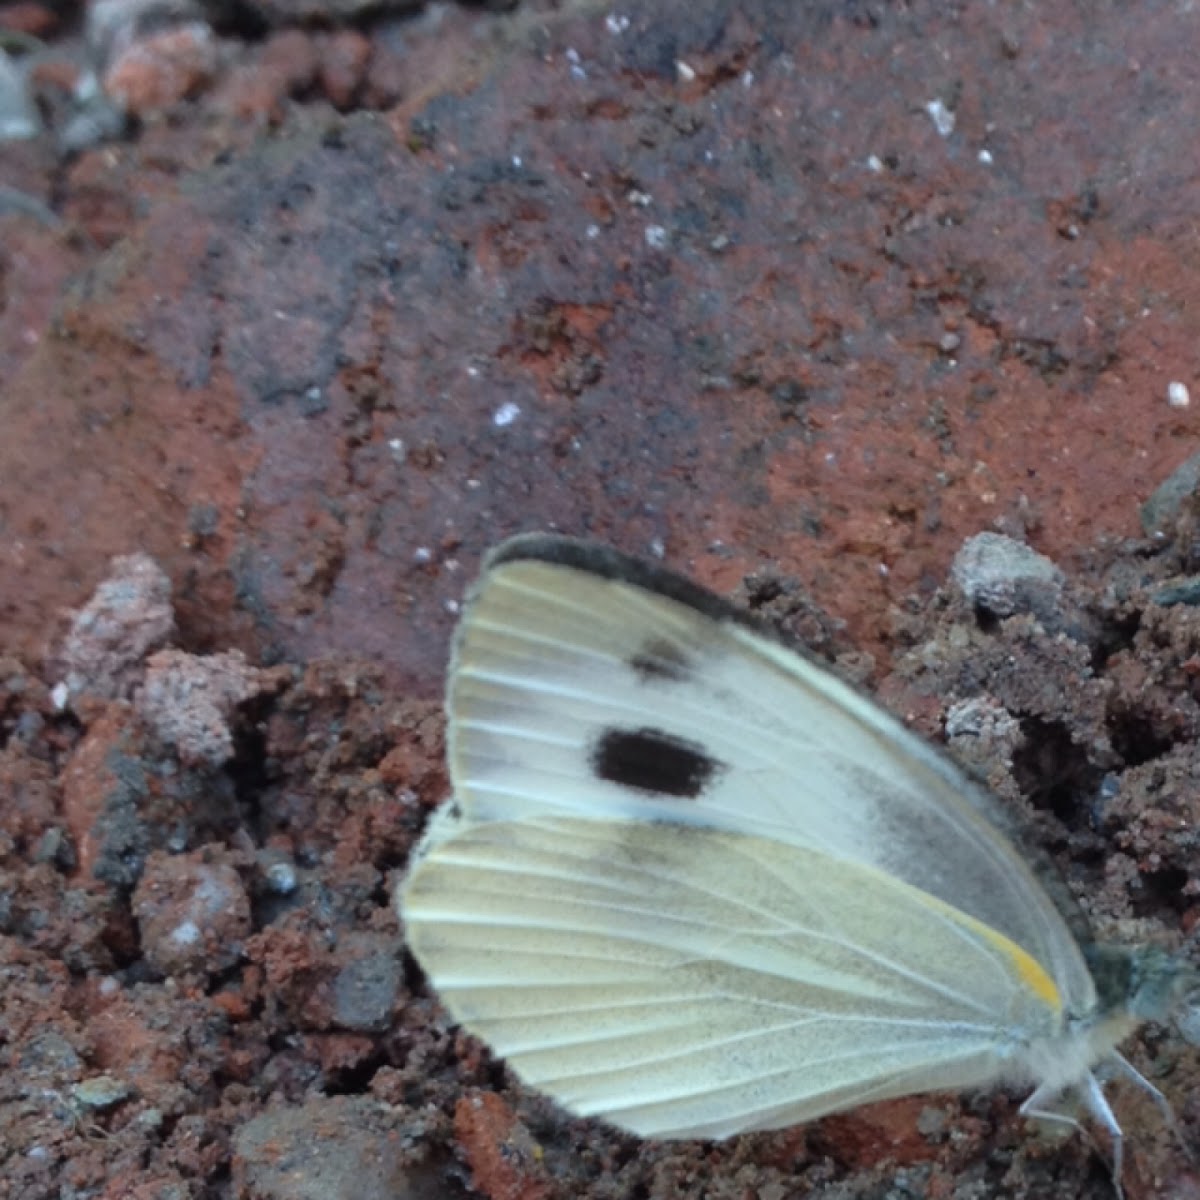 Indian Cabbage White